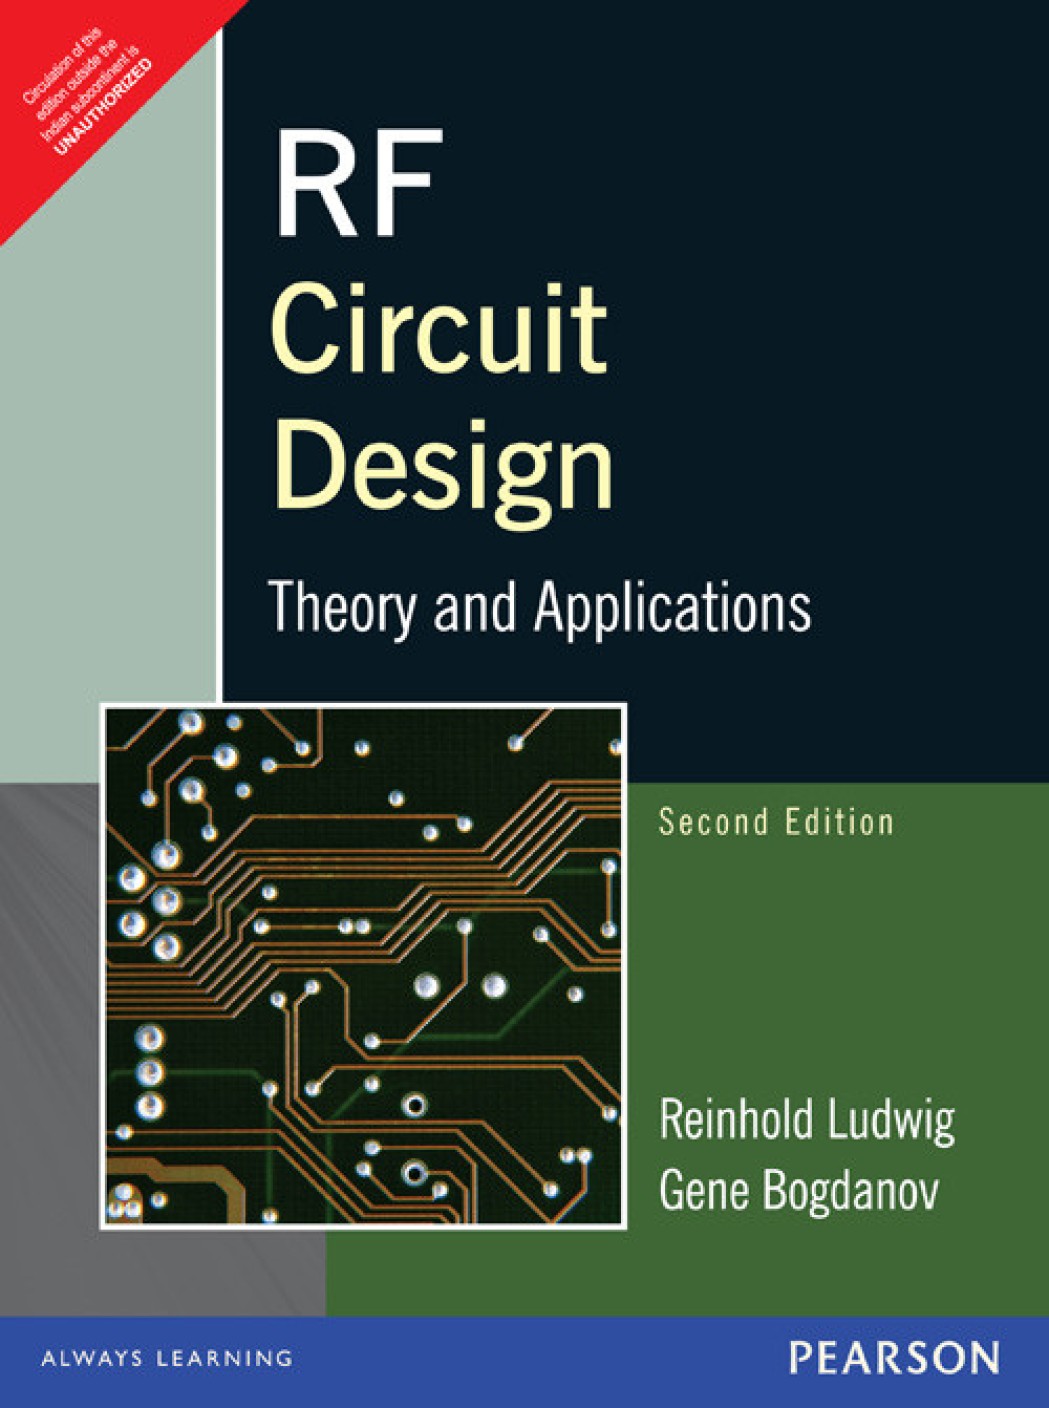 RF Circuit Design Theory & Applications 2nd Edition